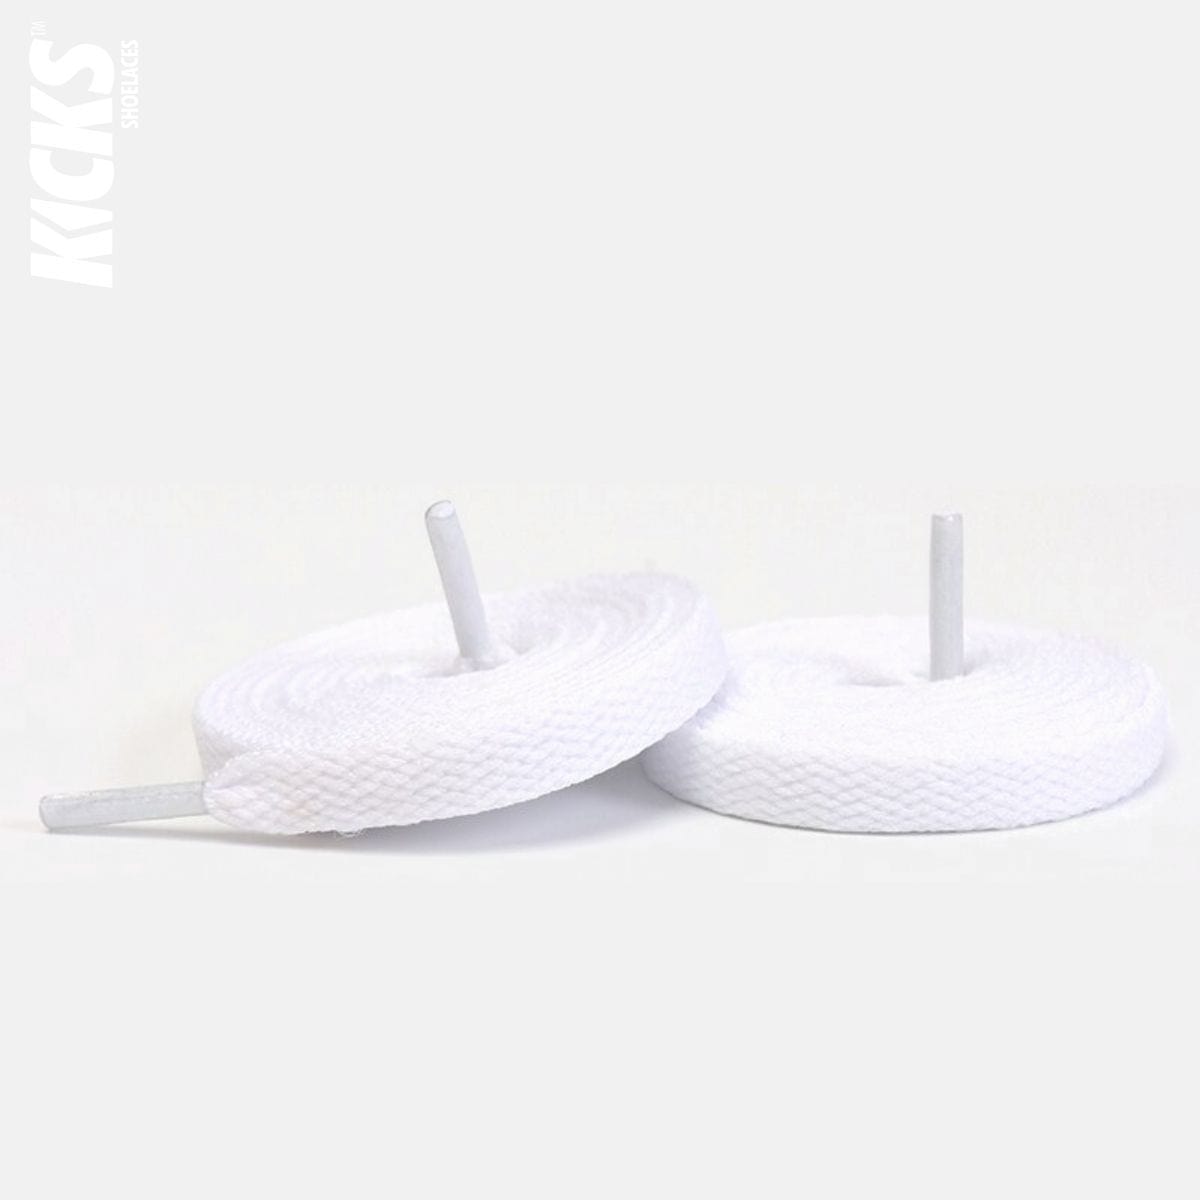 White Replacement Adidas Shoe Laces for Adidas Stan Smith Sneakers by Kicks Shoelaces